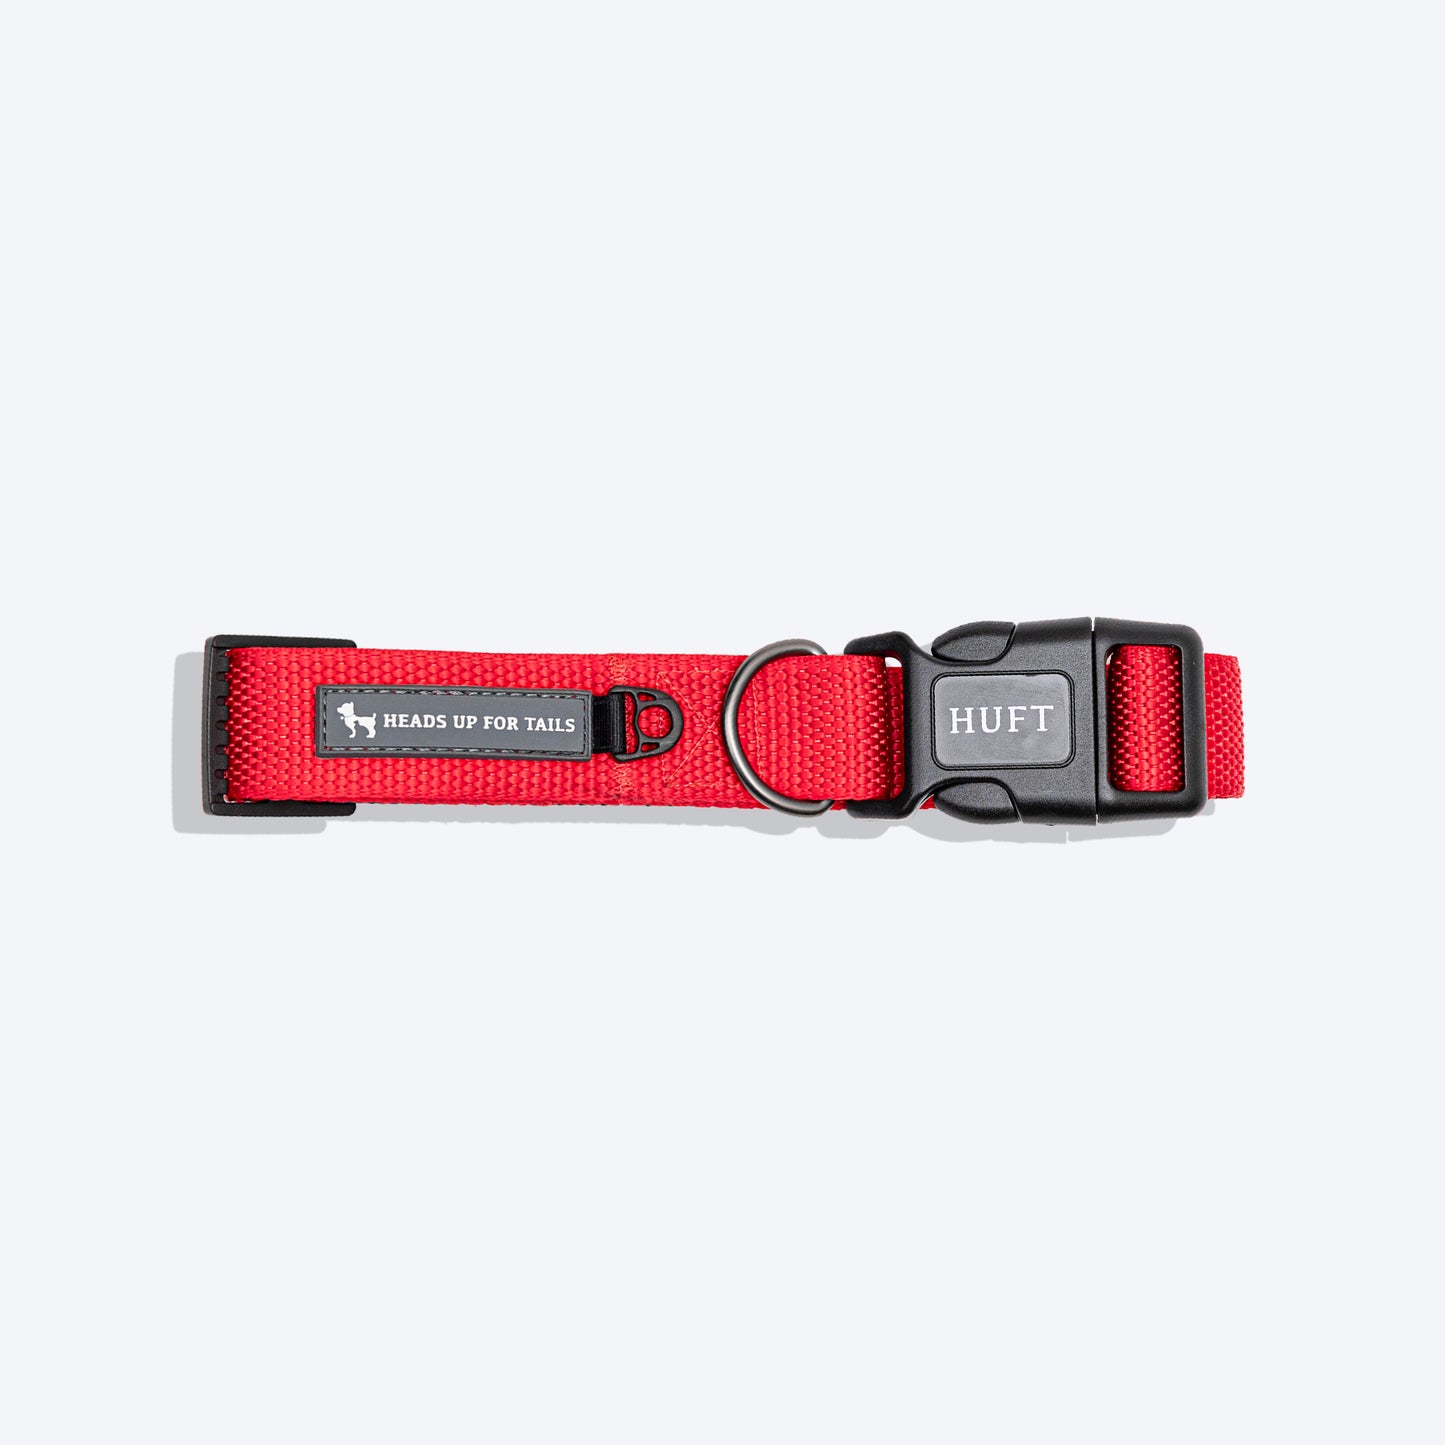 HUFT Personalised (Mobile No.) Basics Dog Collar - Crimson Red - Heads Up For Tails